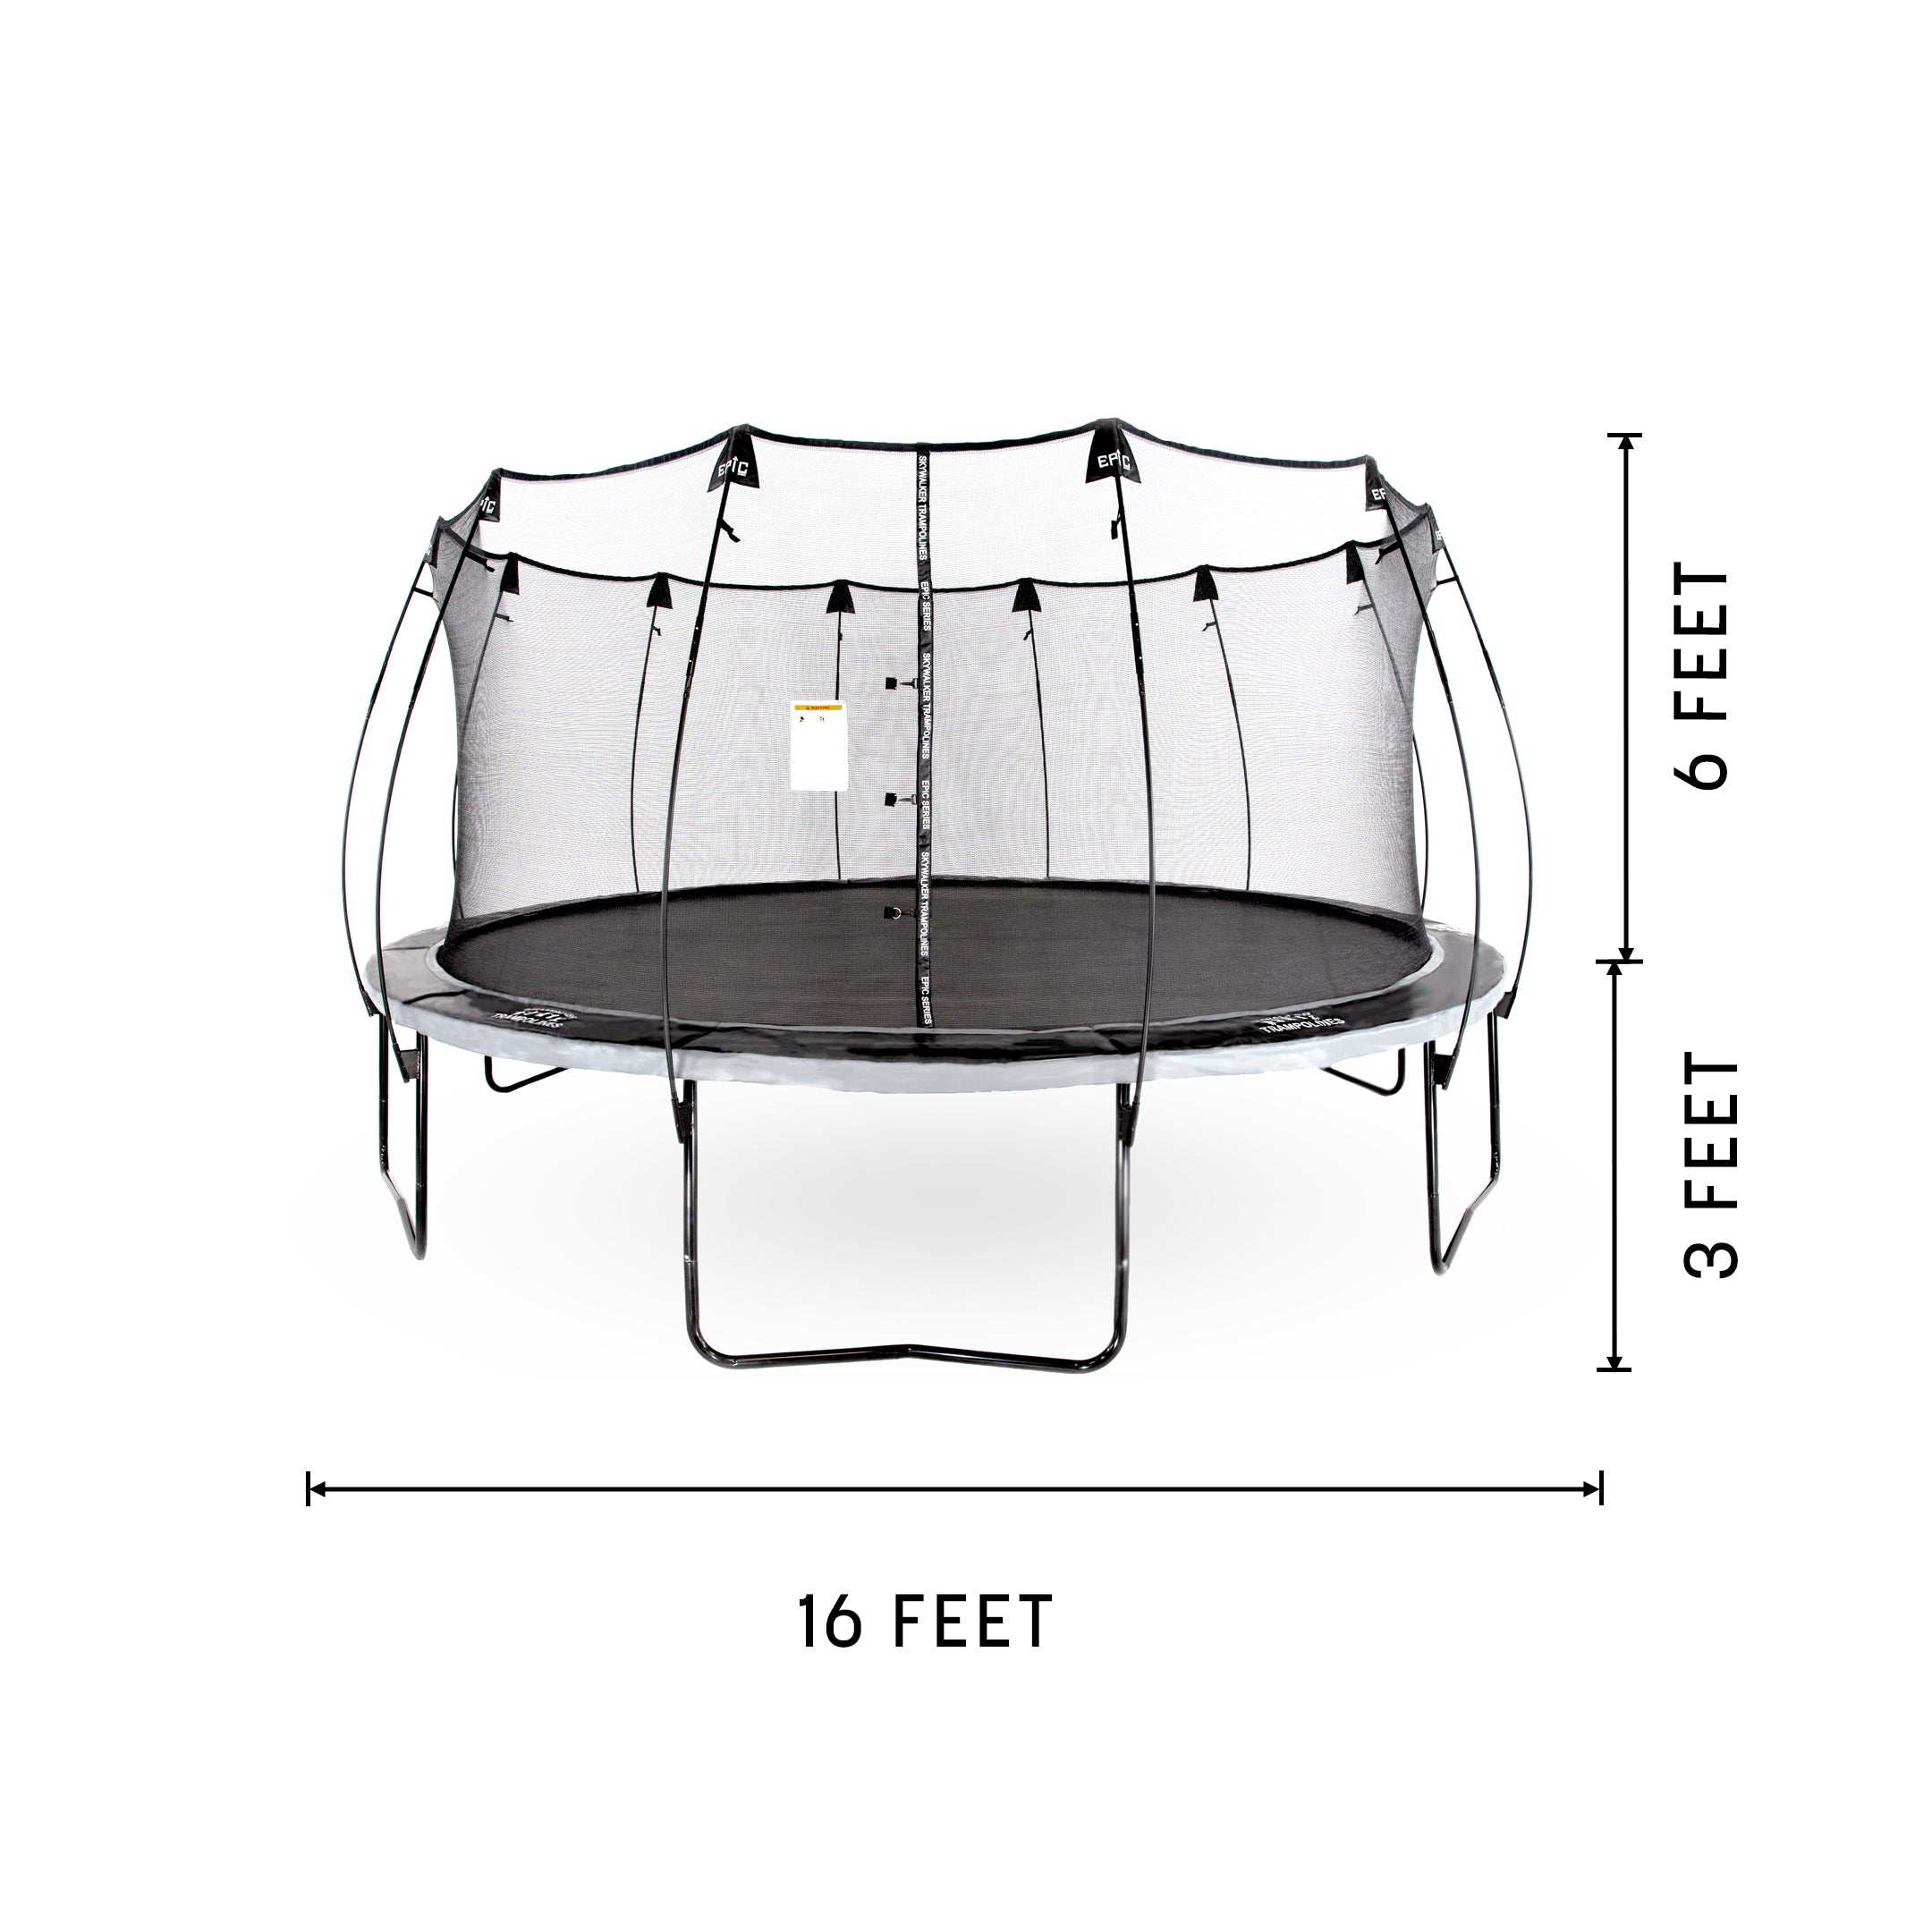 Epic Series Trampoline is 16 feet wide, 3 feet tall from ground to frame, and 6 feet tall from frame to top of the enclosure.